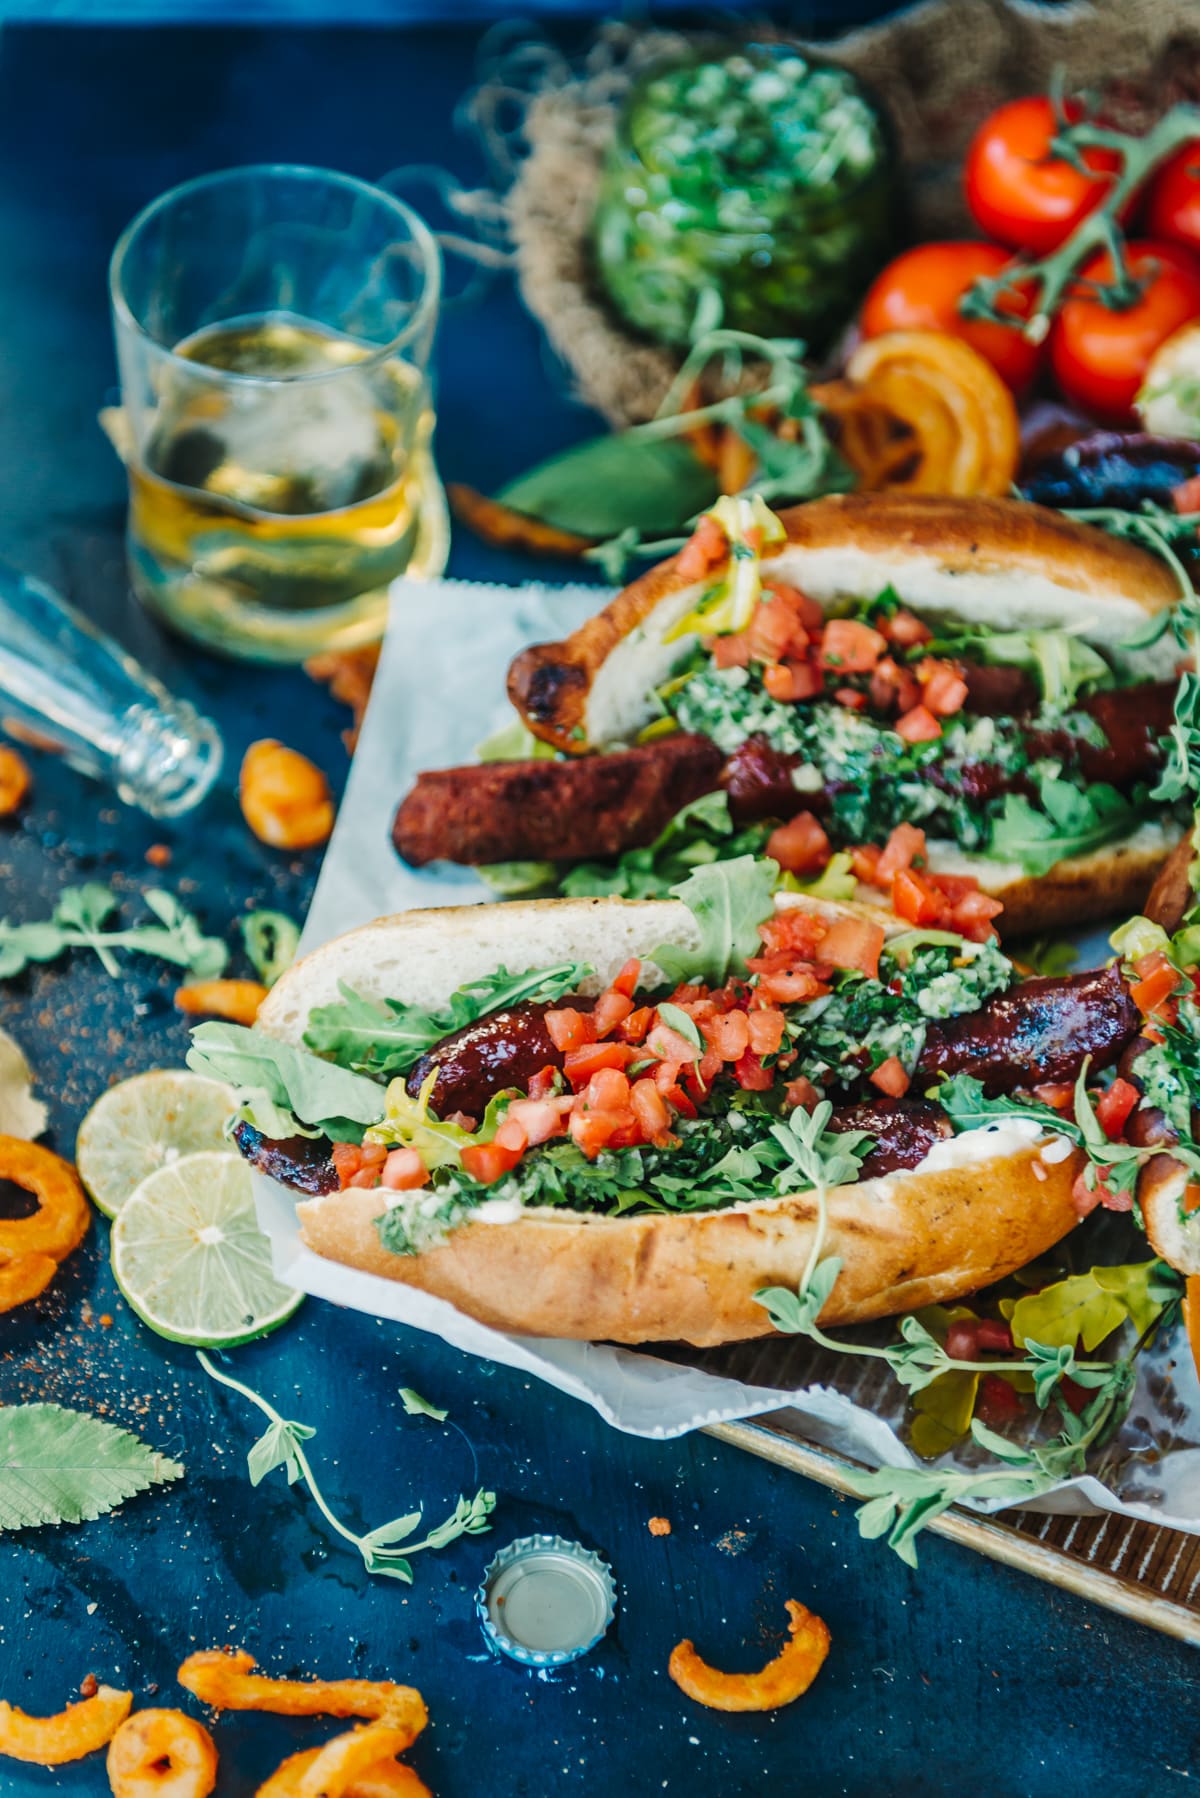 Choripán, The Argentinian Grilled Sausage Sandwiches with grilled chorizo sausages and chimichurri